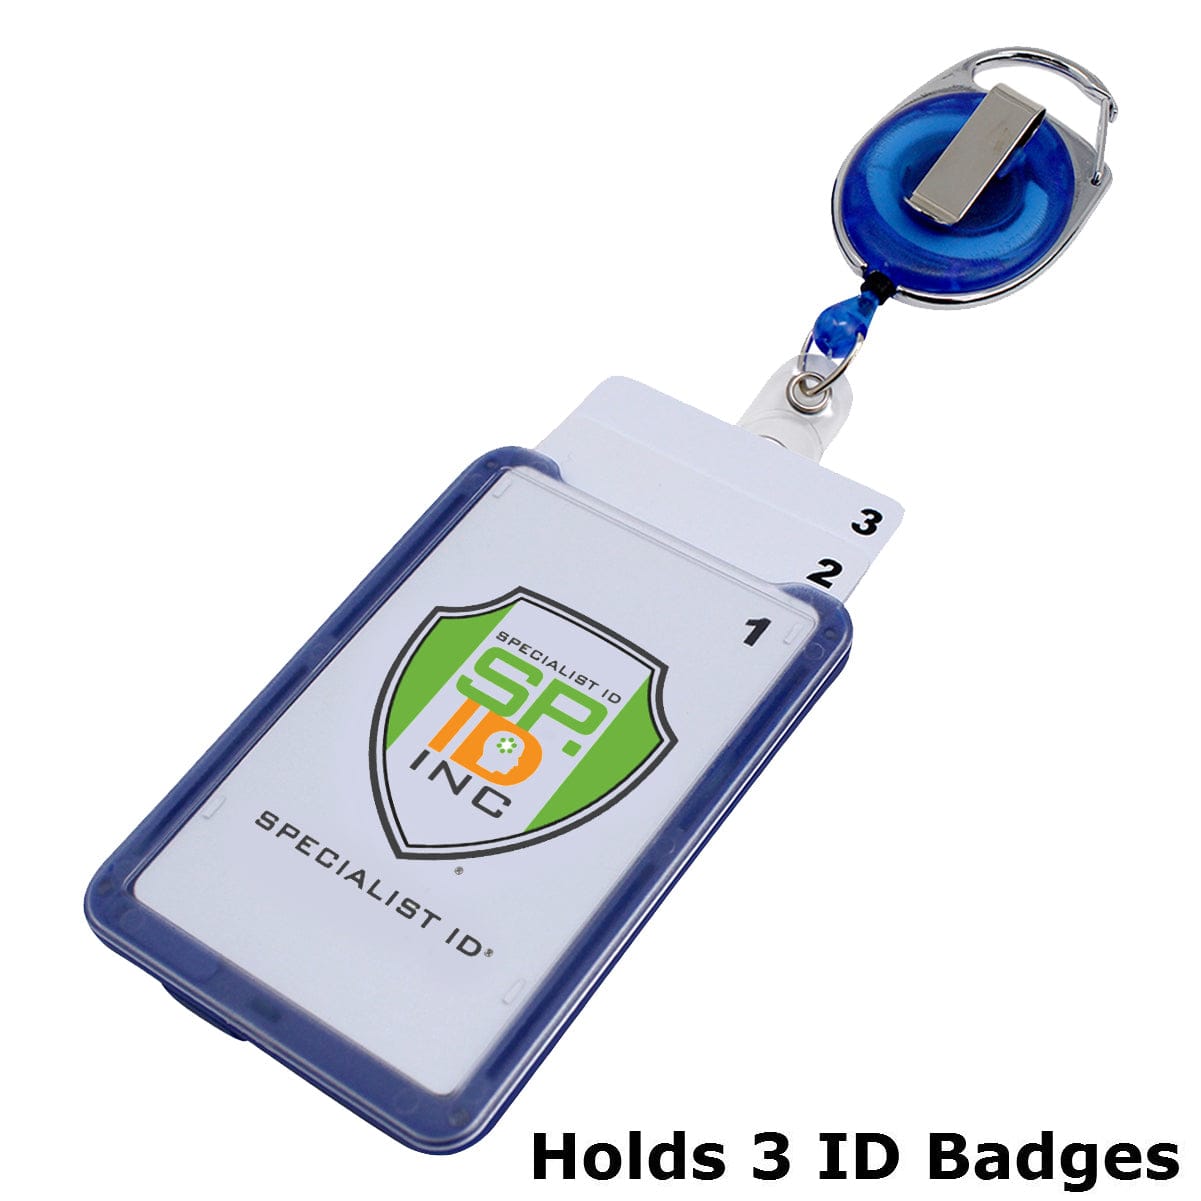 Hard Plastic 3 Card Badge Holder with Badge Reel - Retractable ID Lanyard  Features Belt Clip & Carabiner - Rigid Vertical CAC Holder - Top Load Holds